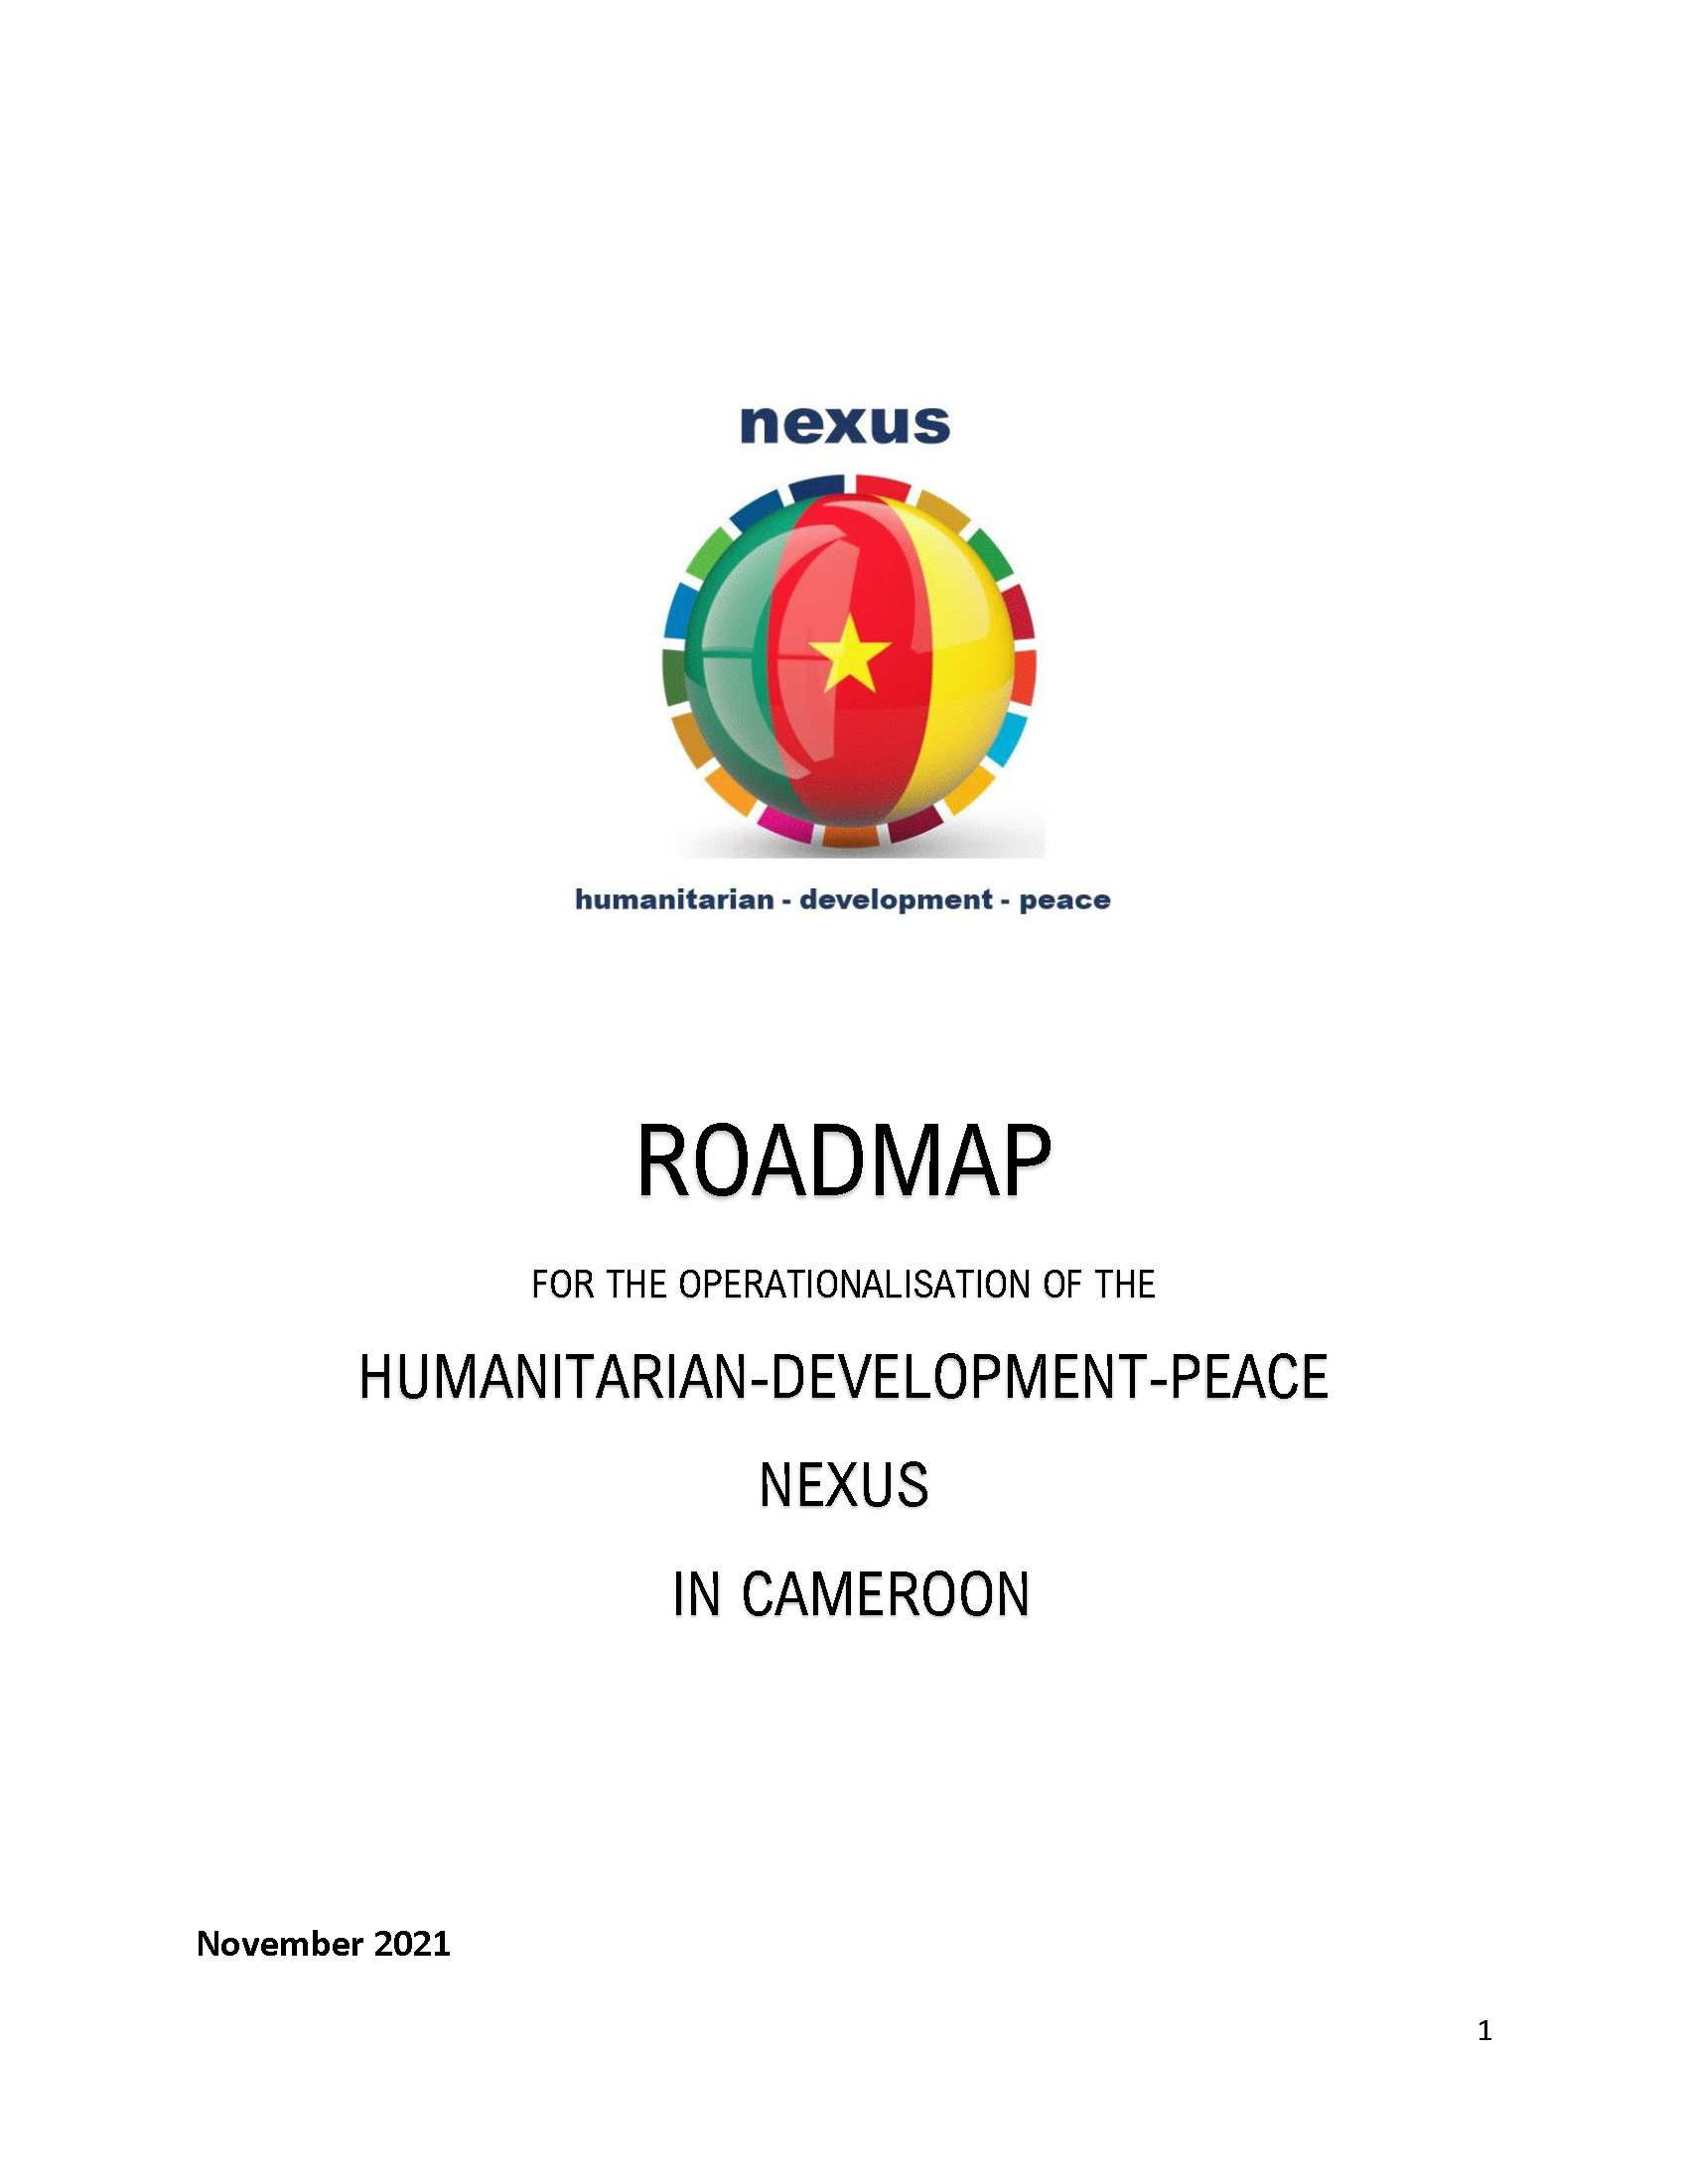 Cover page for Roadmap for the Operationalization of the Humanitarian-Development-Peace Nexus in Cameroon